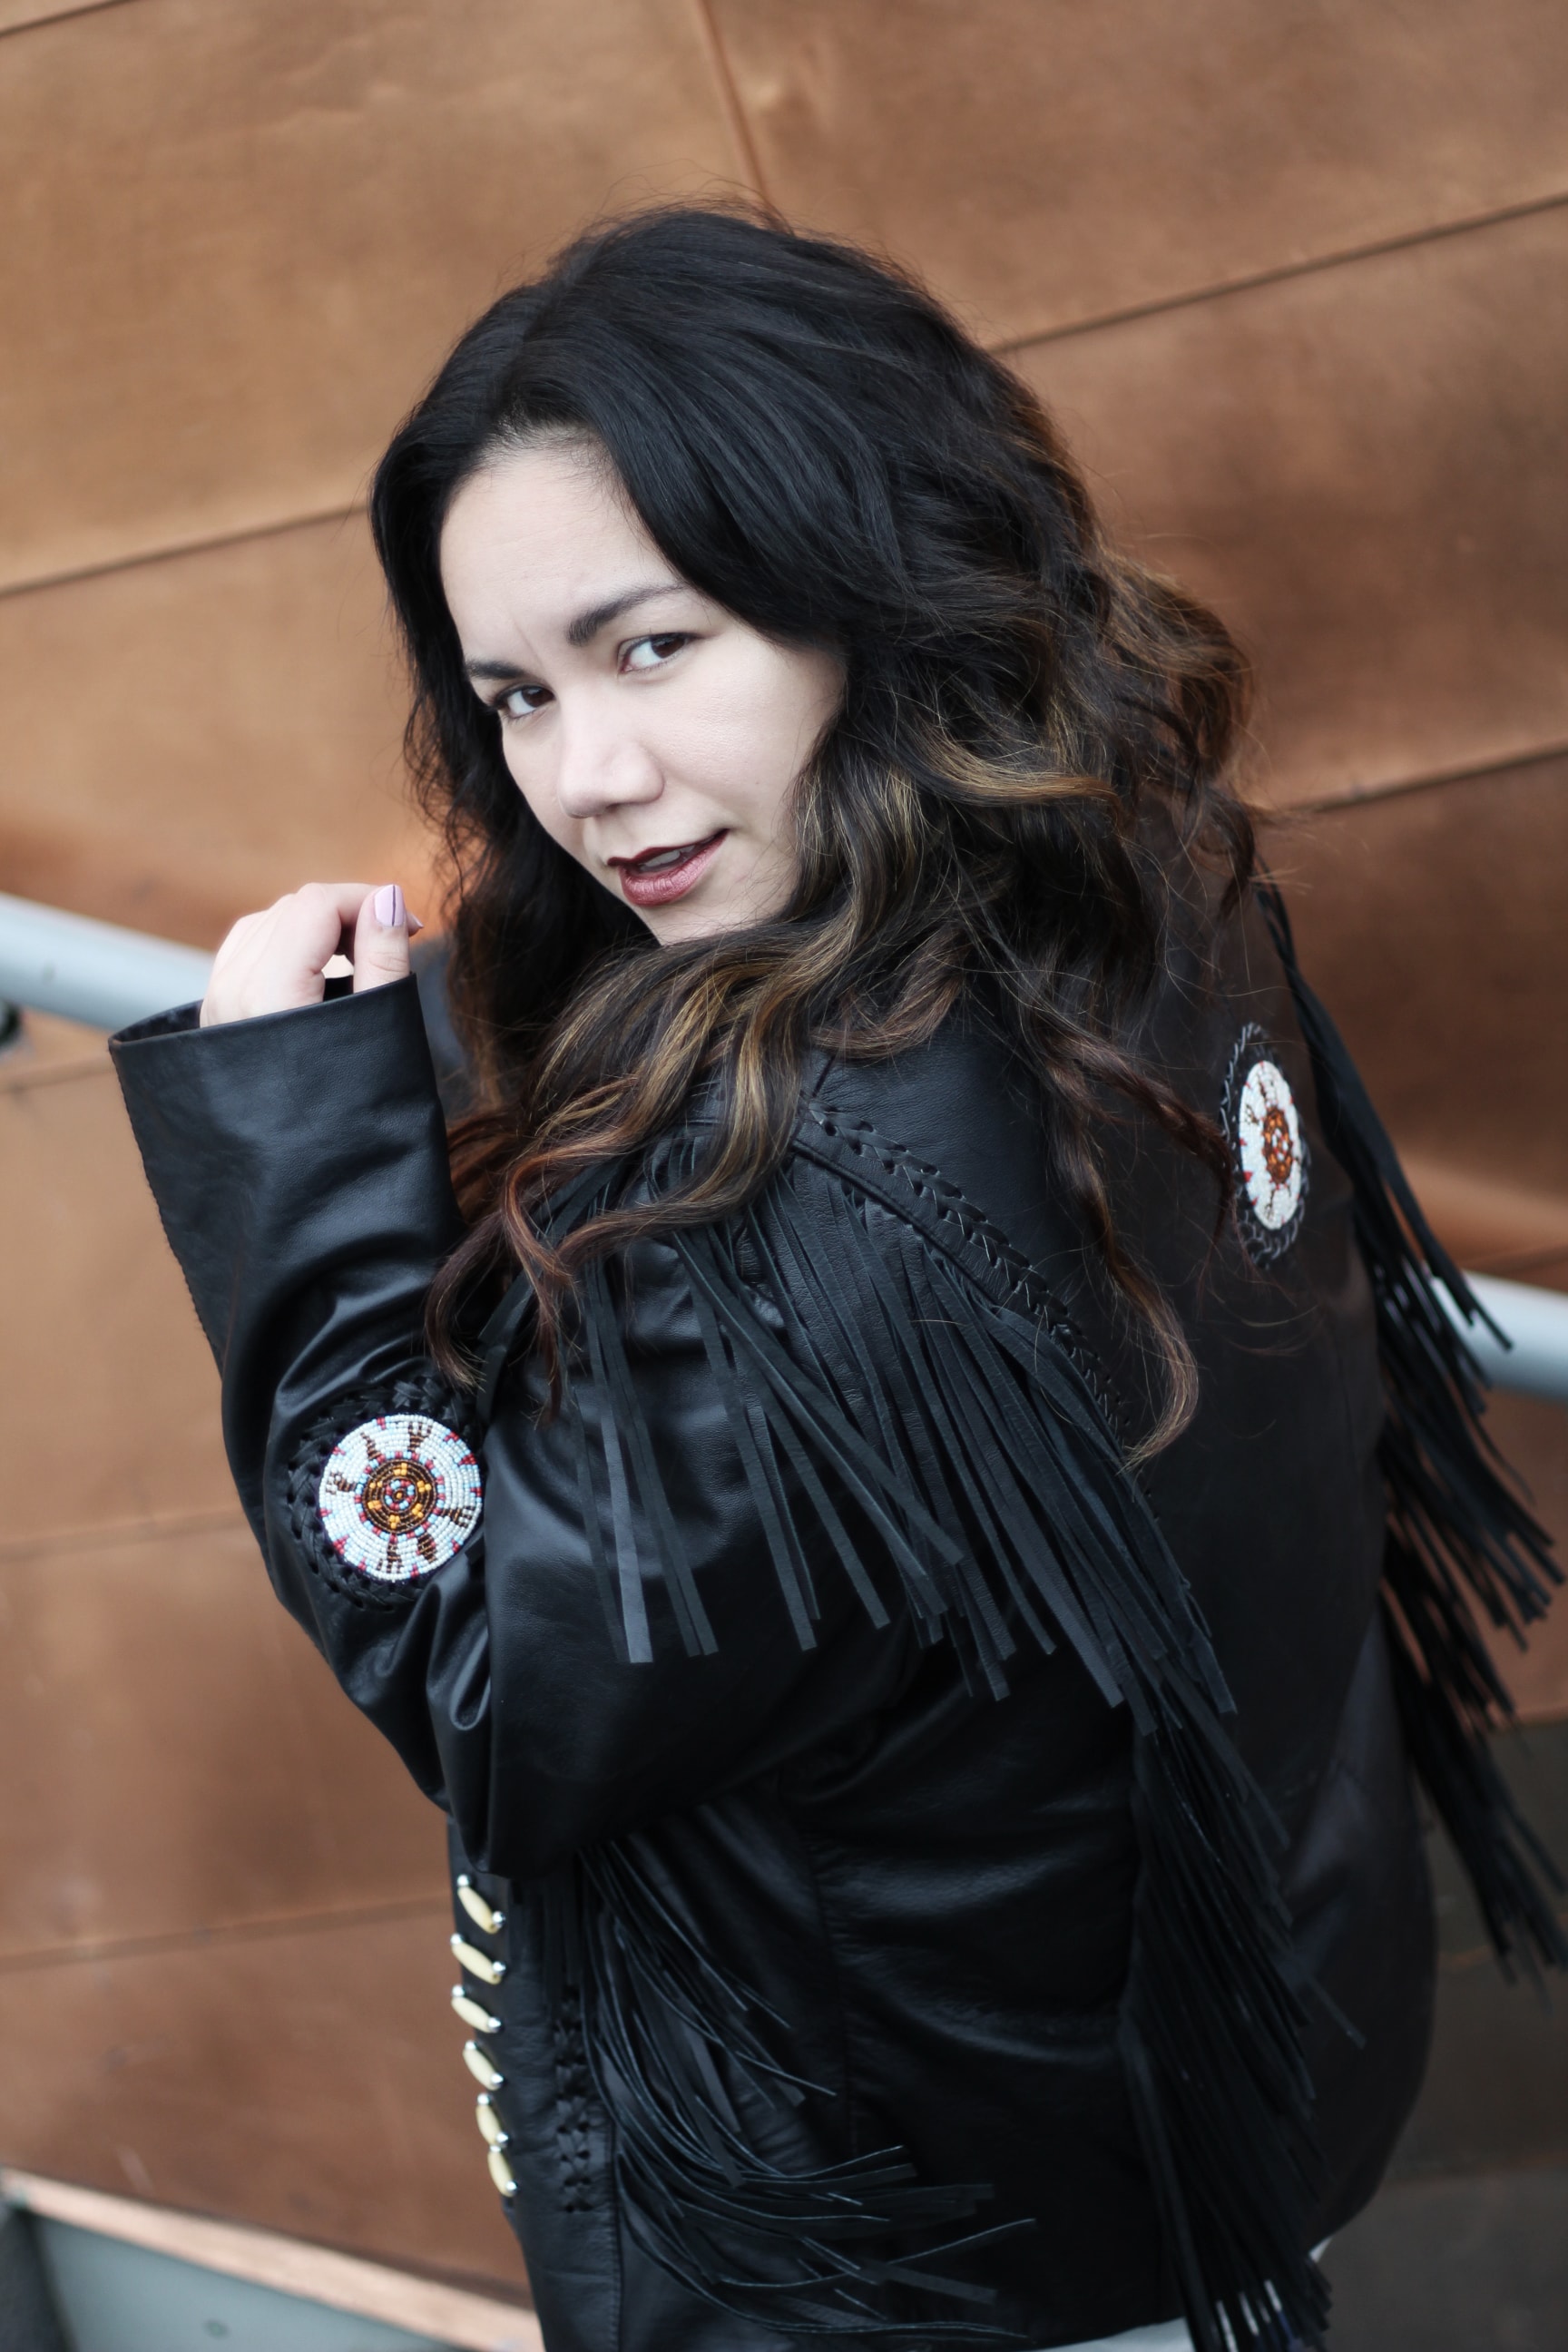 vintage cool leather jacket with denim - blogger mexicana